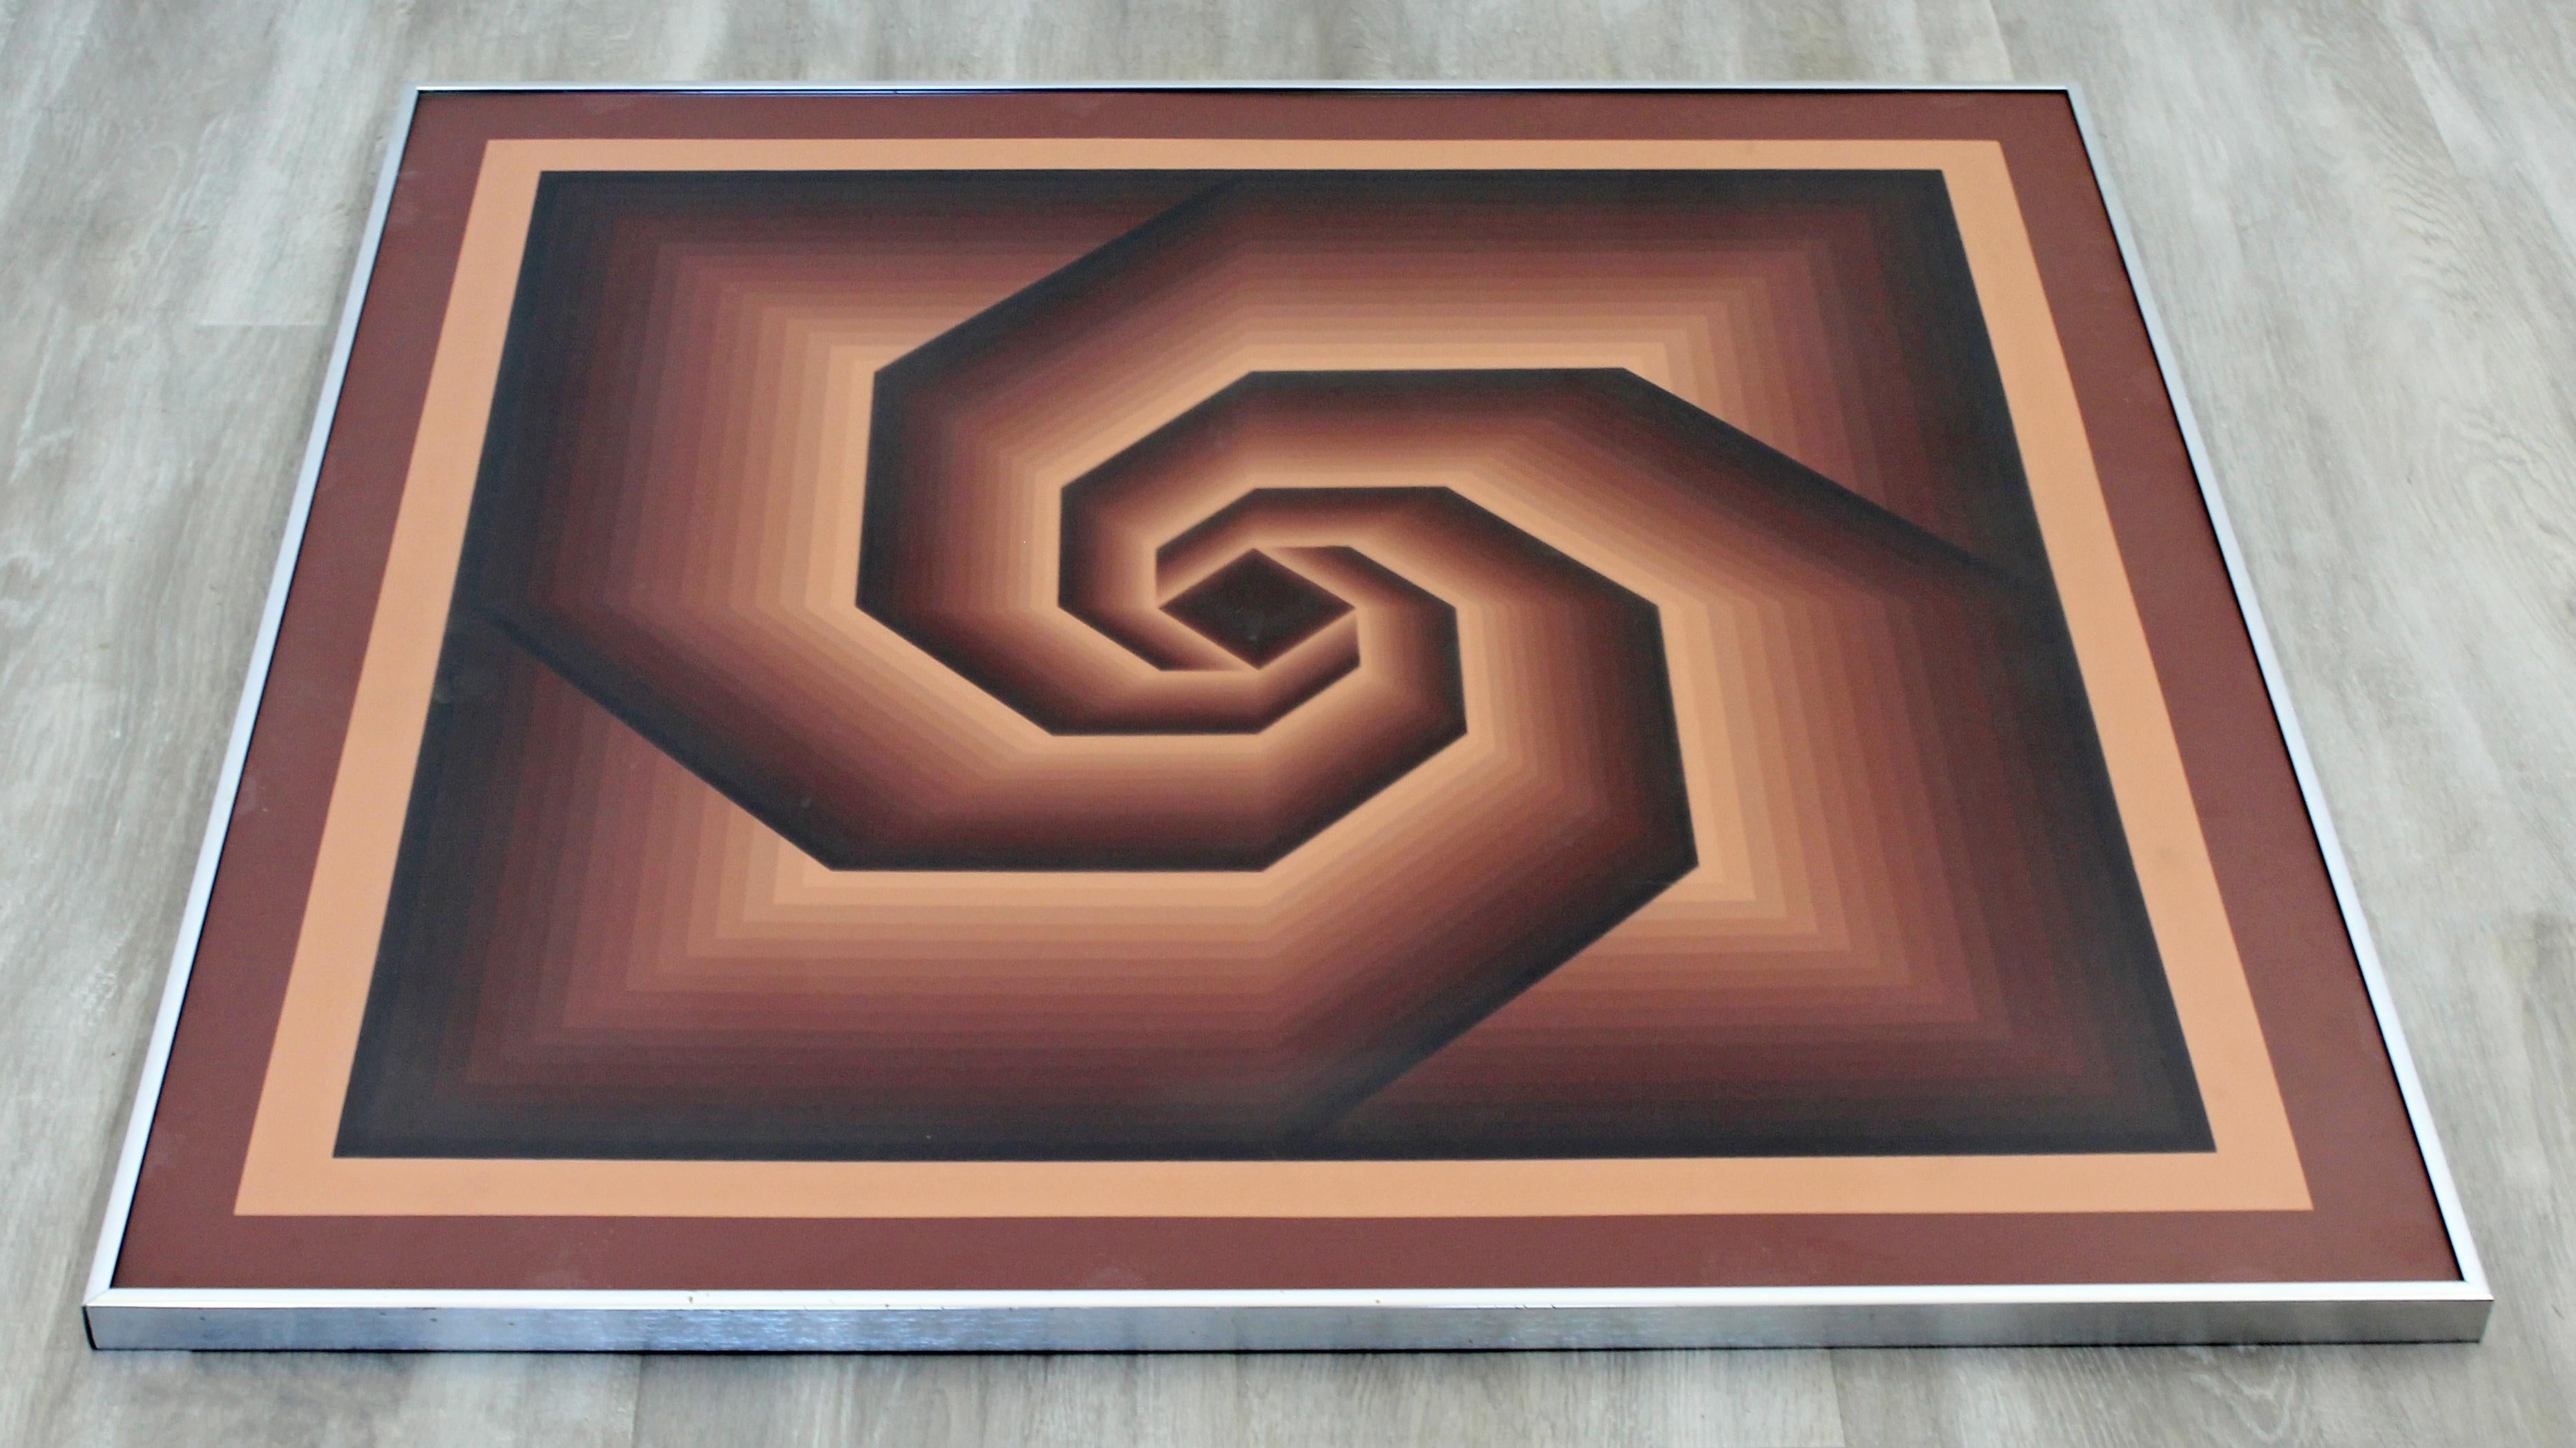 For your consideration is a groovy, framed offset lithograph of a spiraling, Jurgen Peters piece, circa 1970s. In excellent condition. The dimensions of the frame are 30